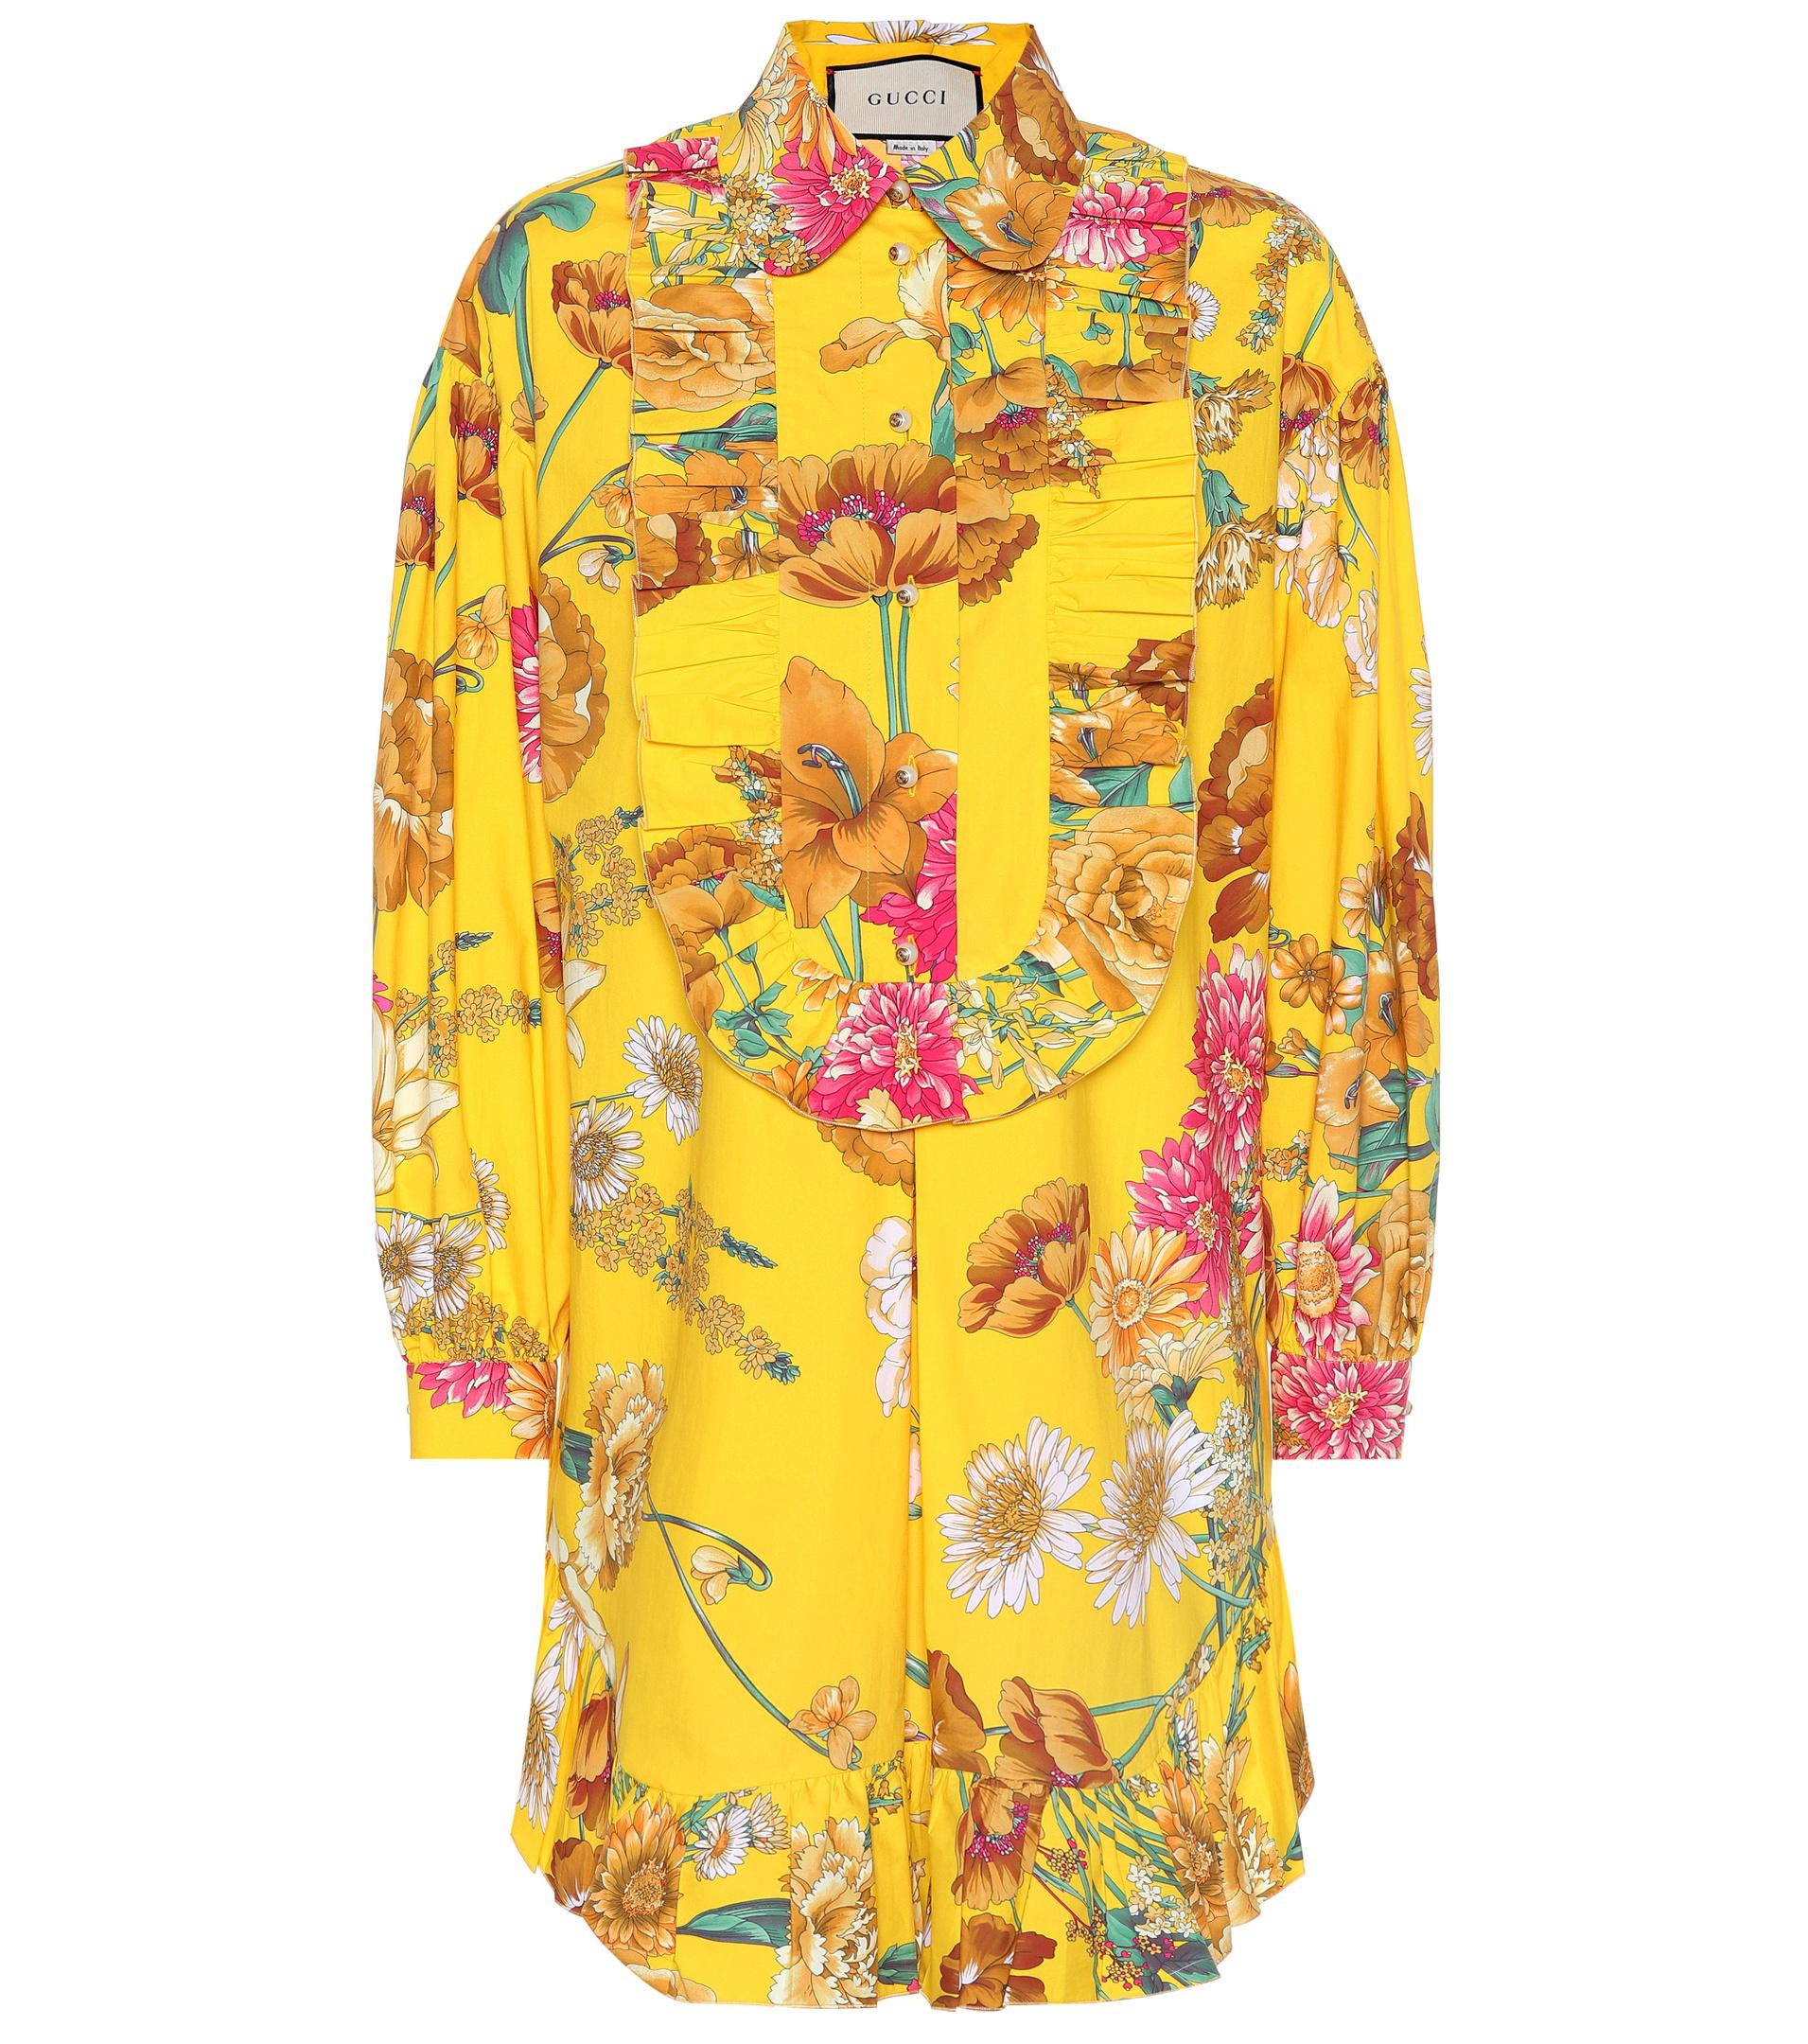 Gucci Floral-printed Cotton Shirt in Yellow - Lyst